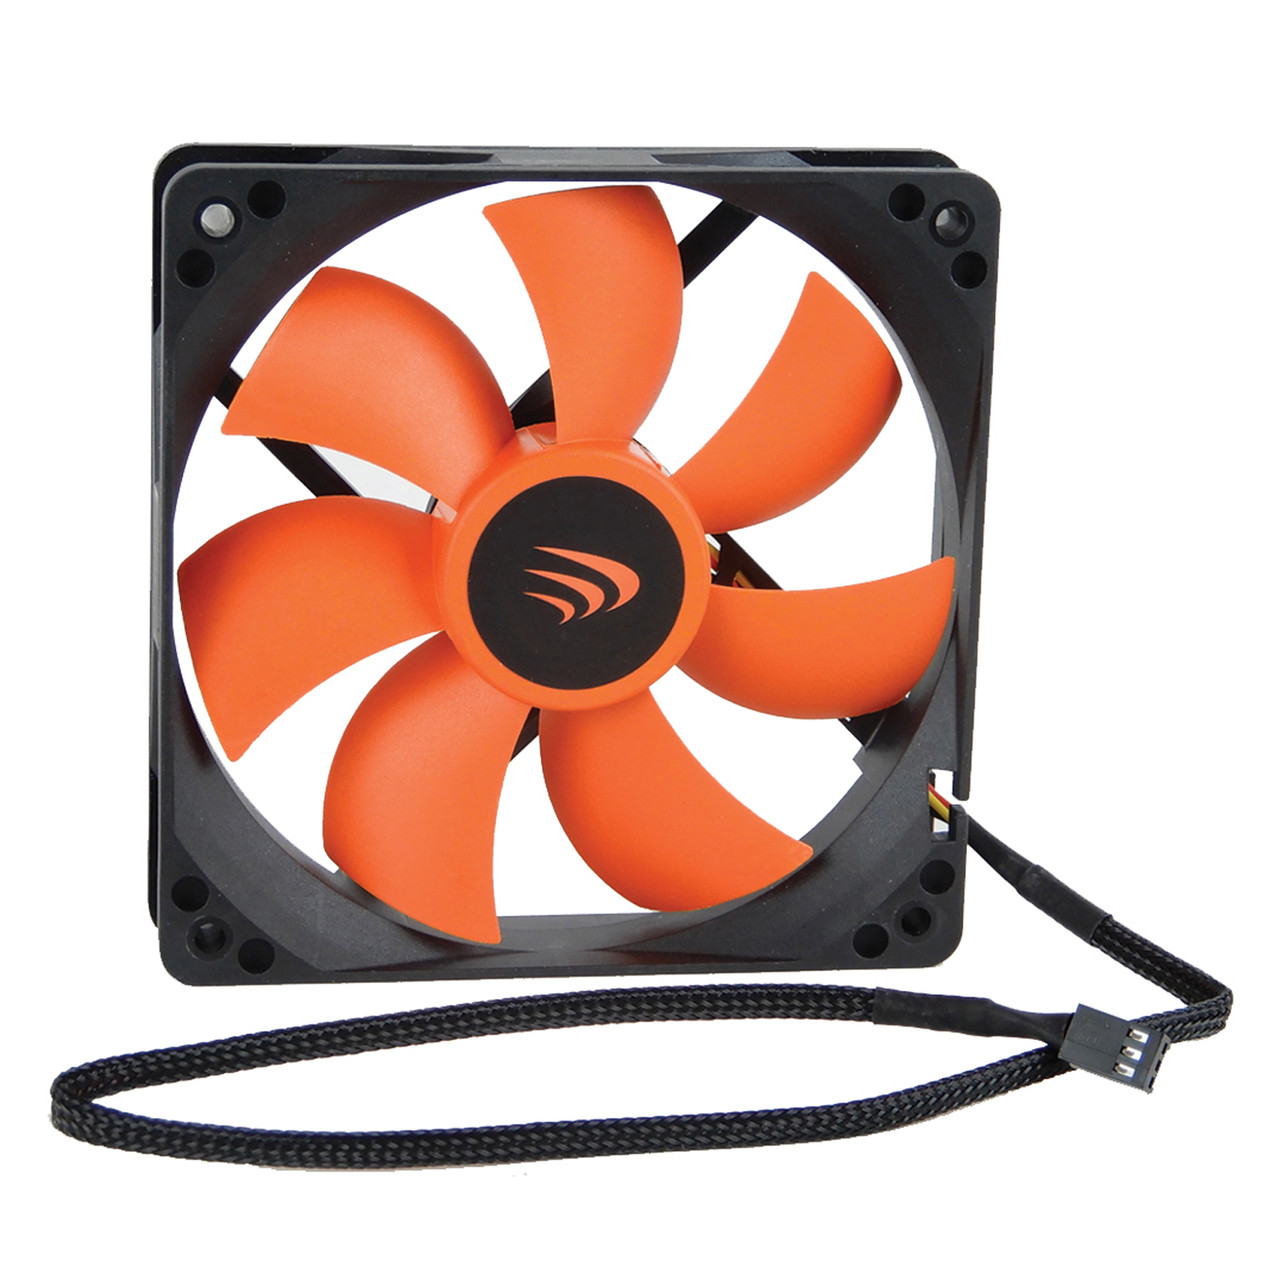 Set of 6 - AAAwave 120mm Double ball bearing Silent Cooling Fan, CPU Cooler, Water-Cooling Radiator and Case